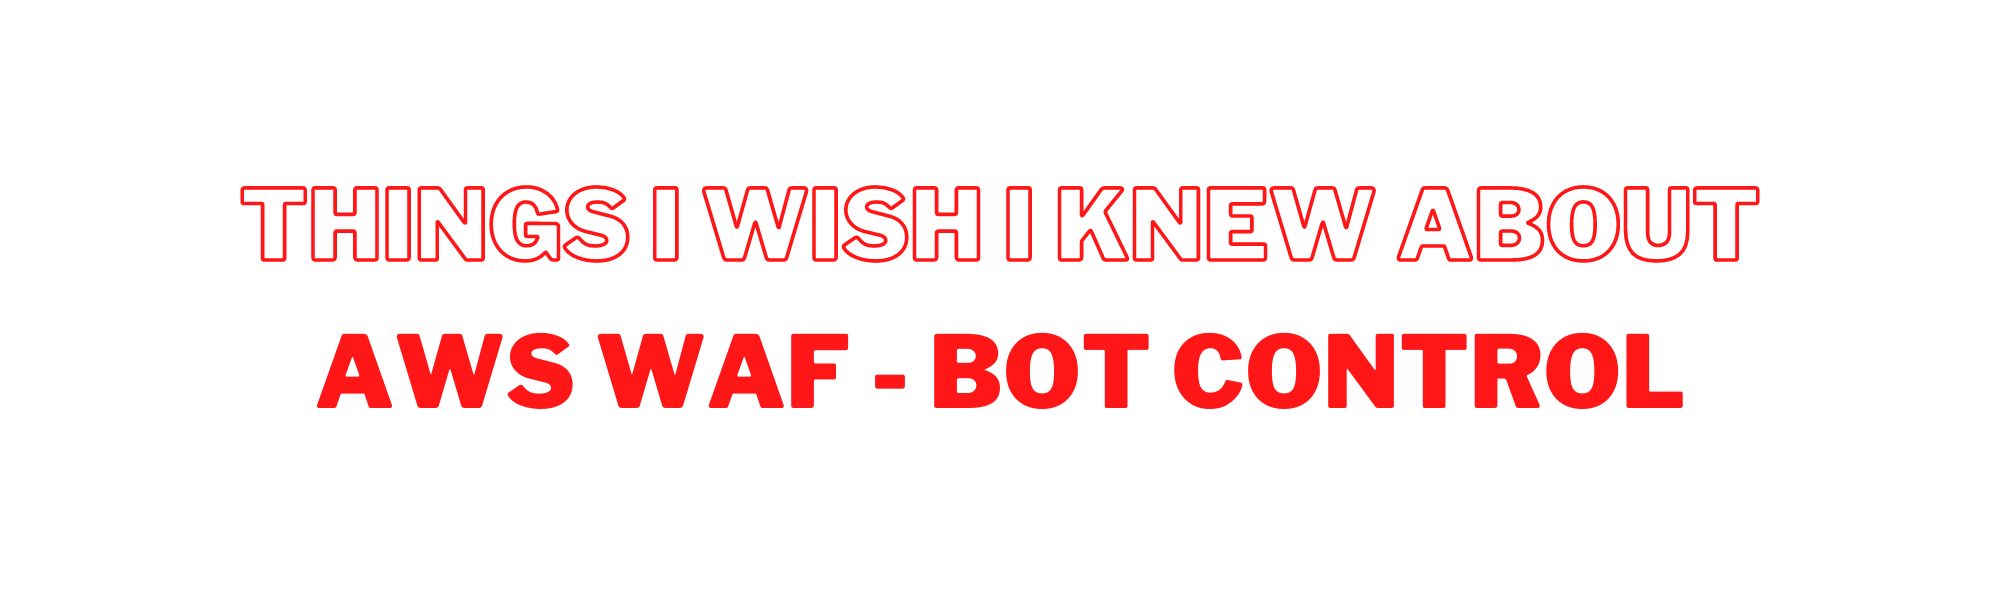 /things-i-wish-i-knew-aws-waf-bot-control/cover-image.jpg